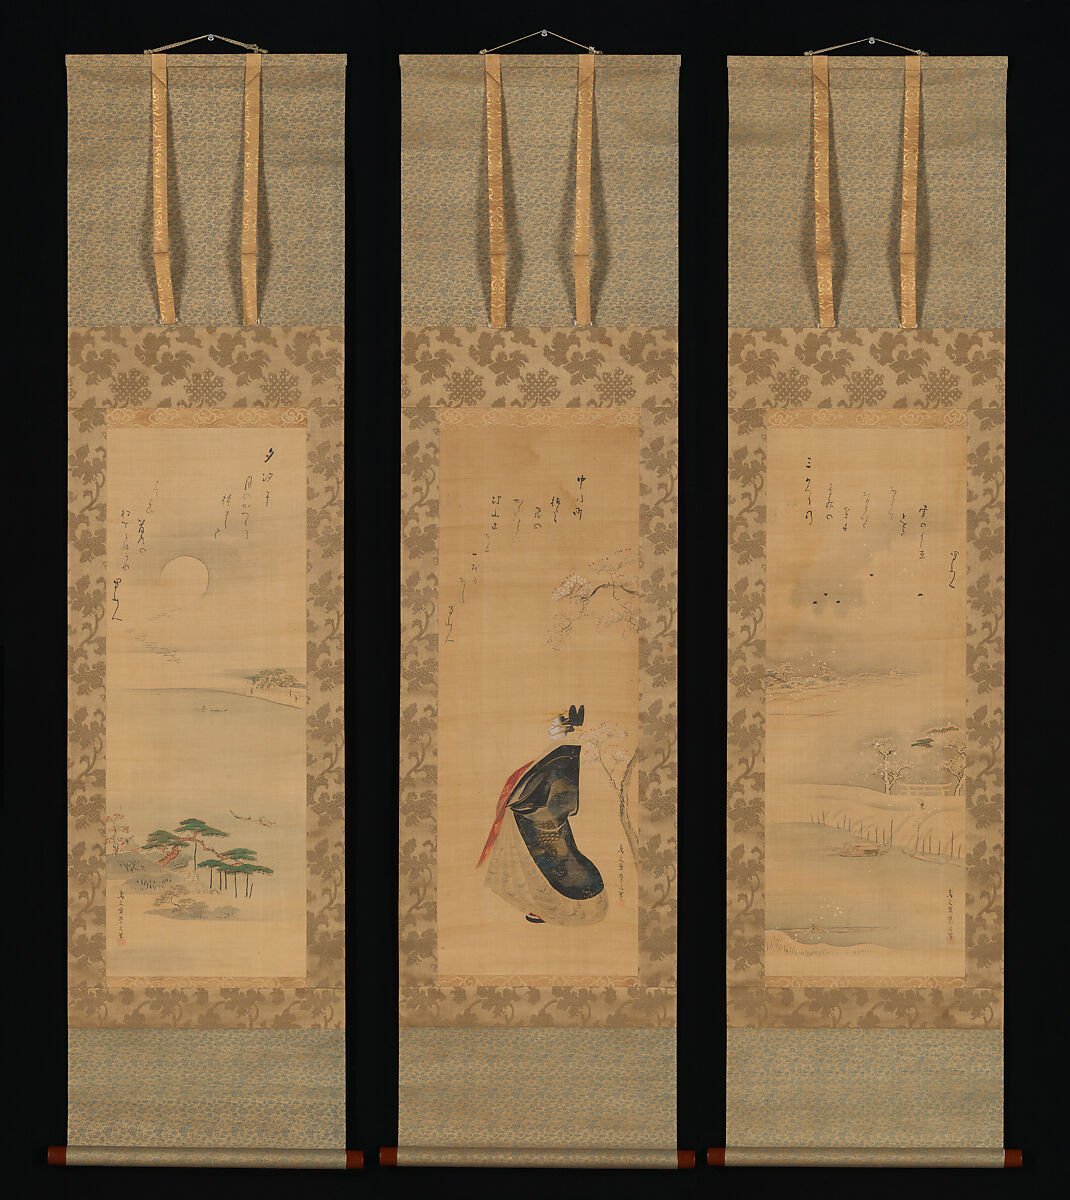 Snow, Moon, and Cherry Blossoms (Yoshiwara in Three Seasons), Chōbunsai Eishi (Japanese, 1756–1829), Triptych of  hanging scrolls; ink, color, and gold on silk, Japan 